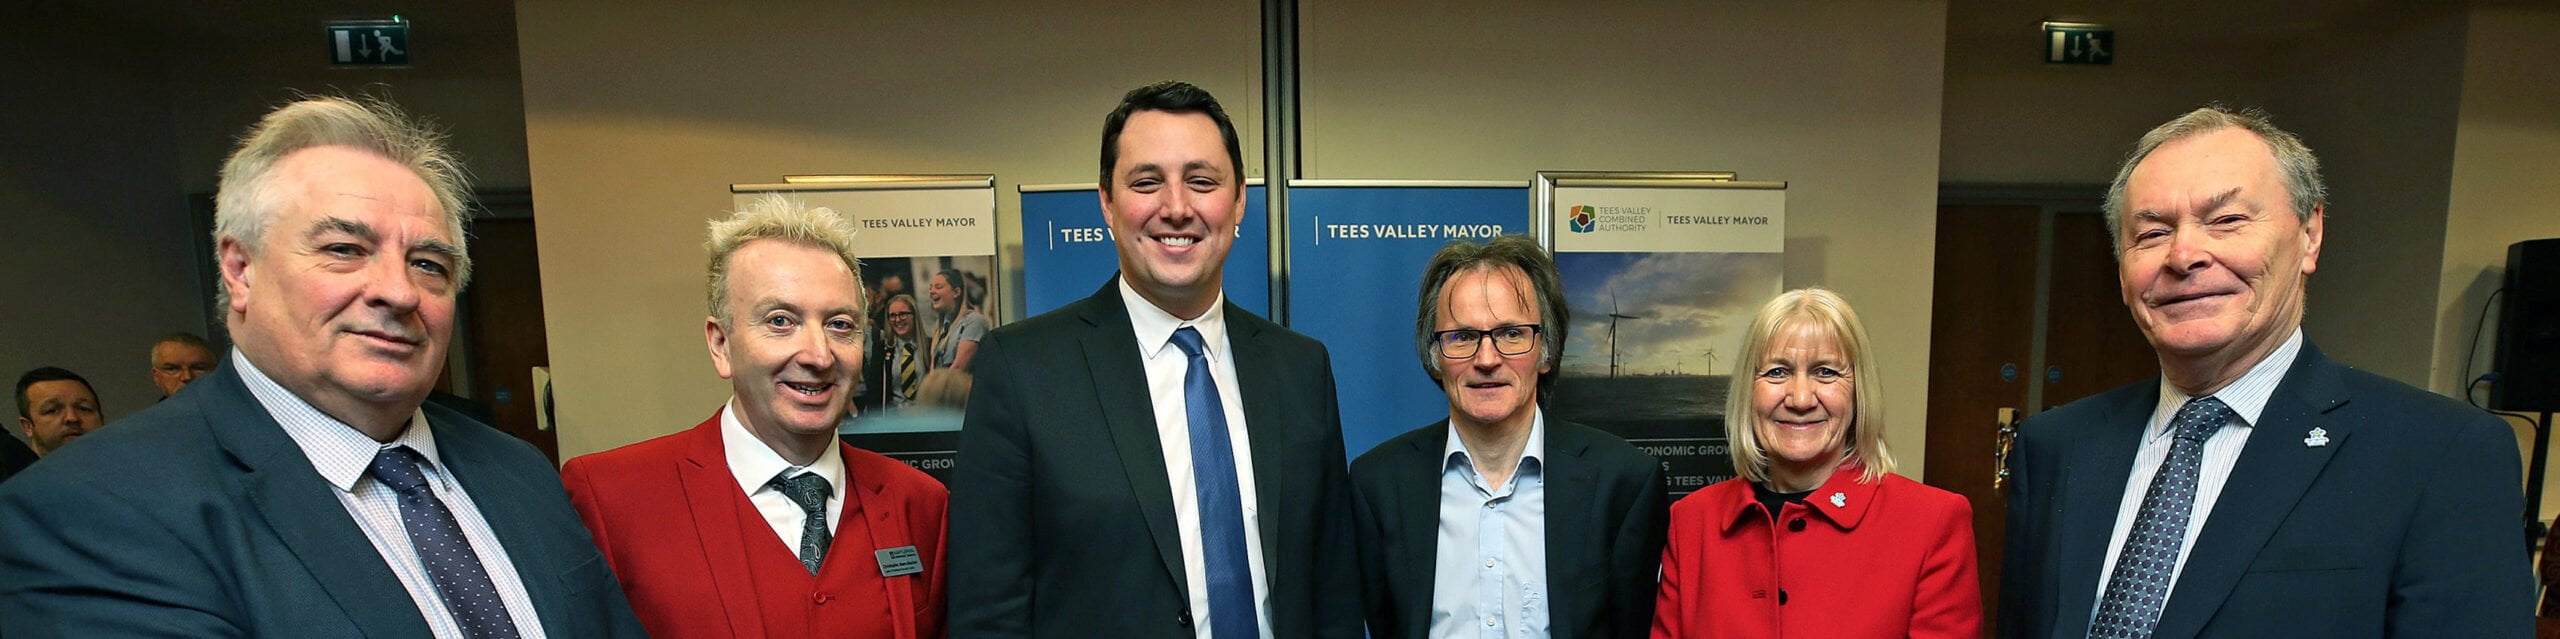 Tees Valley Mayor and Five Local Authority Leaders | Tees Valley Combined Authority